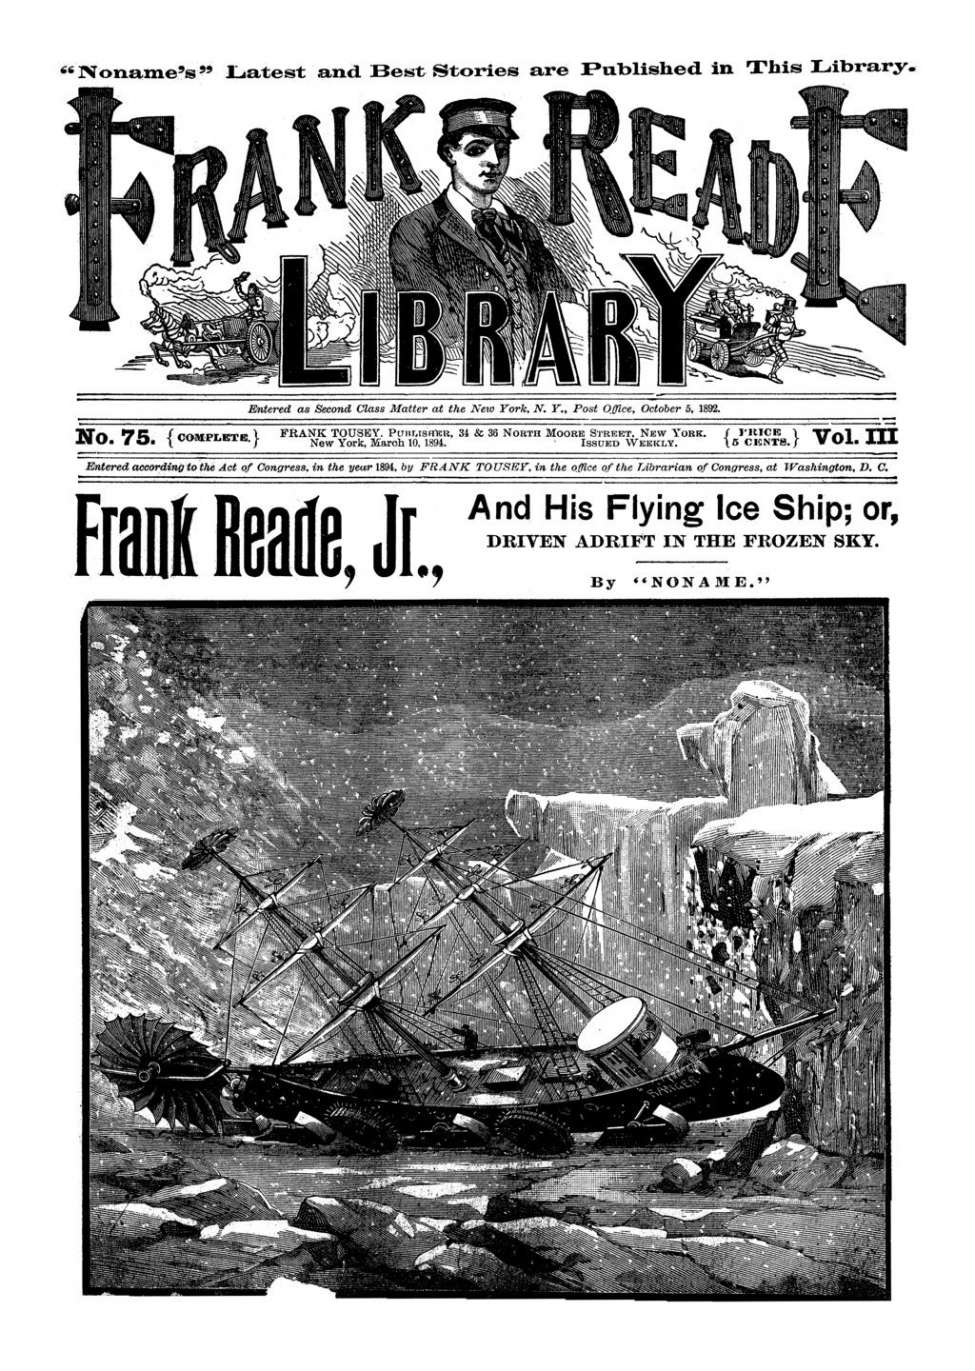 Book Cover For v03 75 - Frank Reade, Jr. and His Flying Ice Ship